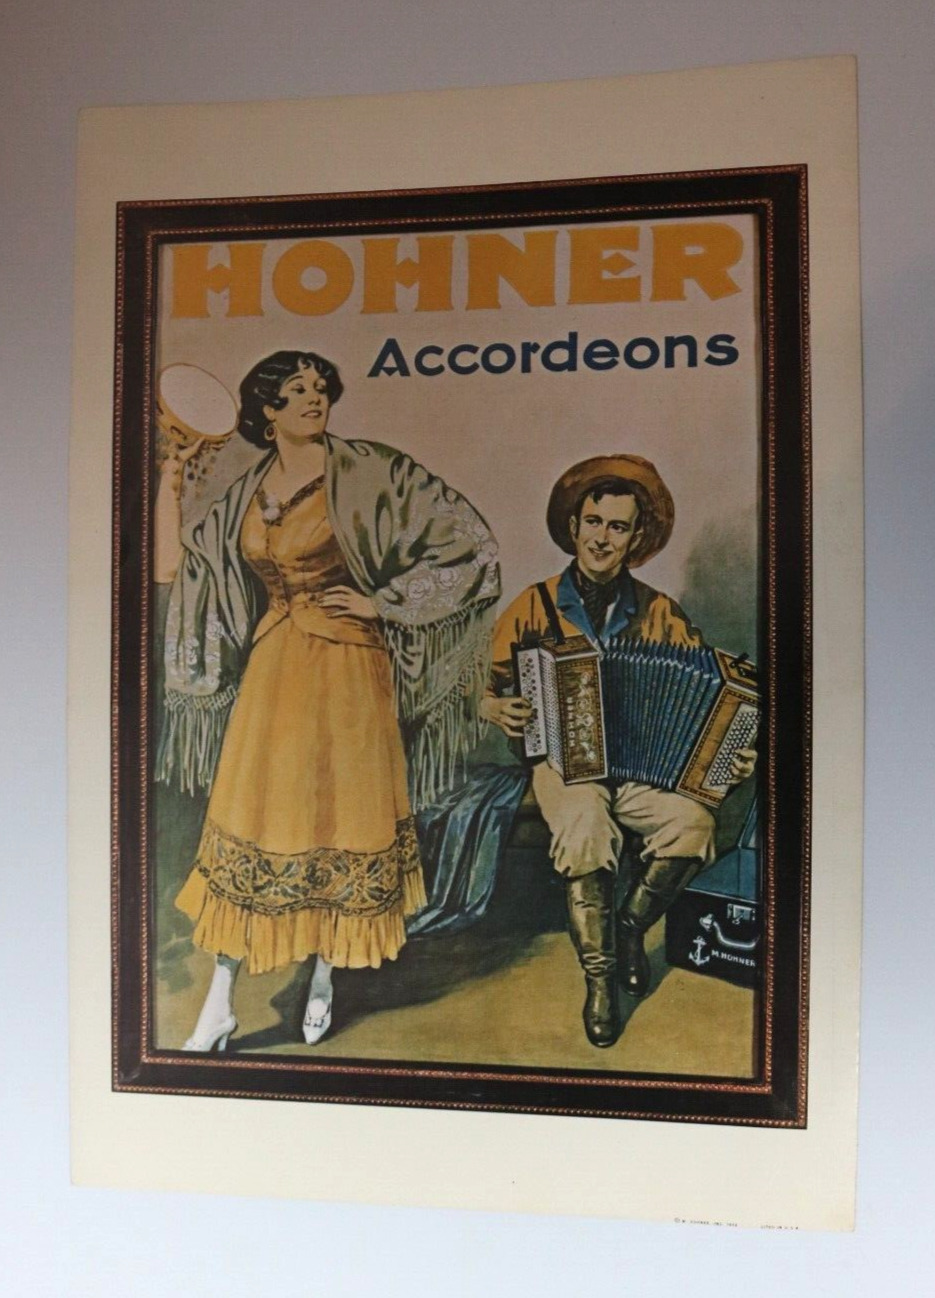 M. Hohner Accordions Vintage Litho Poster 12x17 Lithograph 1972 Tambourine Lady